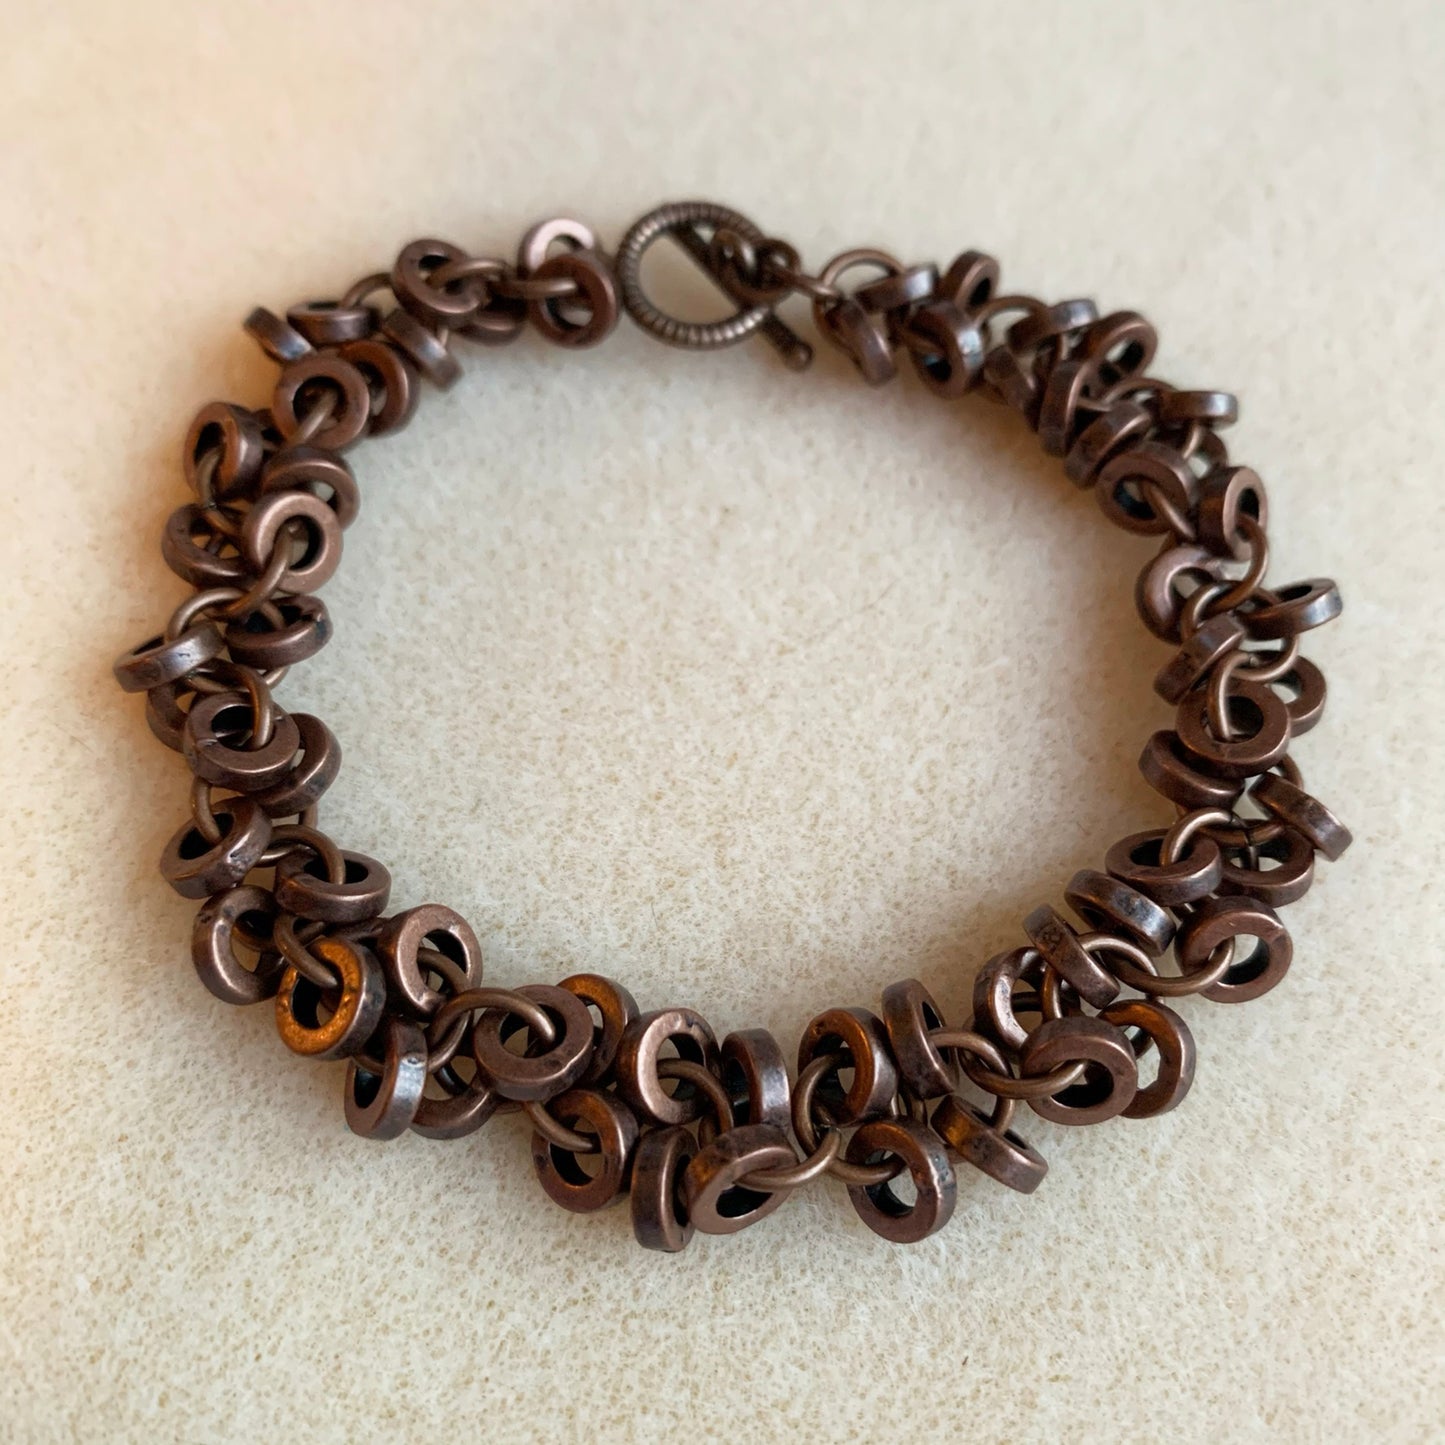 Shaggy Loop Bracelet with Smooth Pewter Rings - Free Video